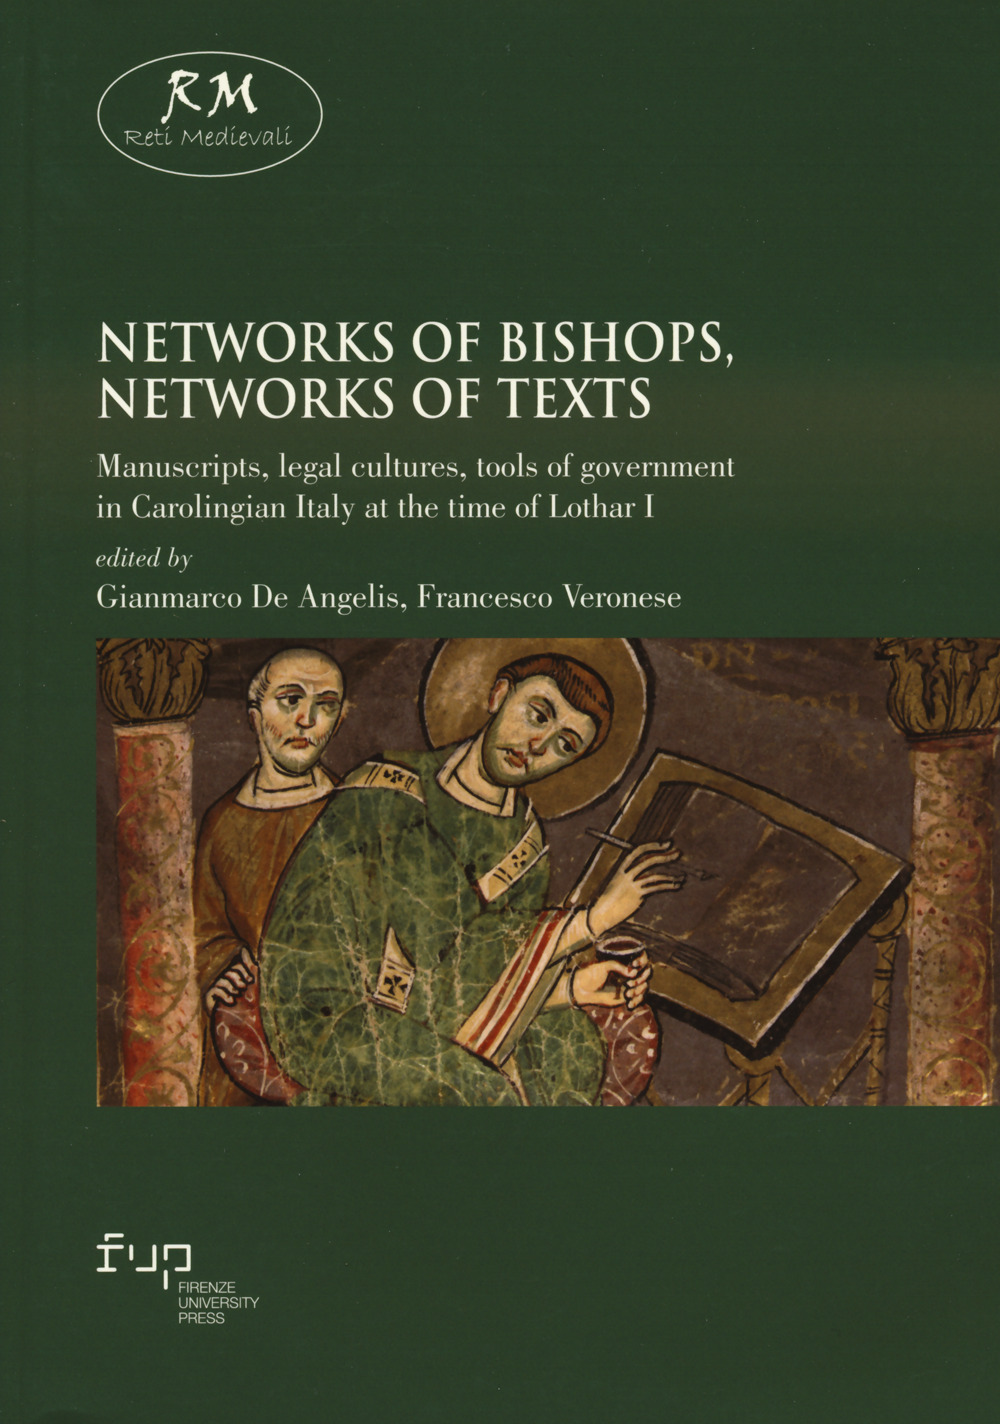 Networks of bishops, networks of texts. Manuscripts, legal cultures, tools of government in Carolingian Italy at the time of Lothar I